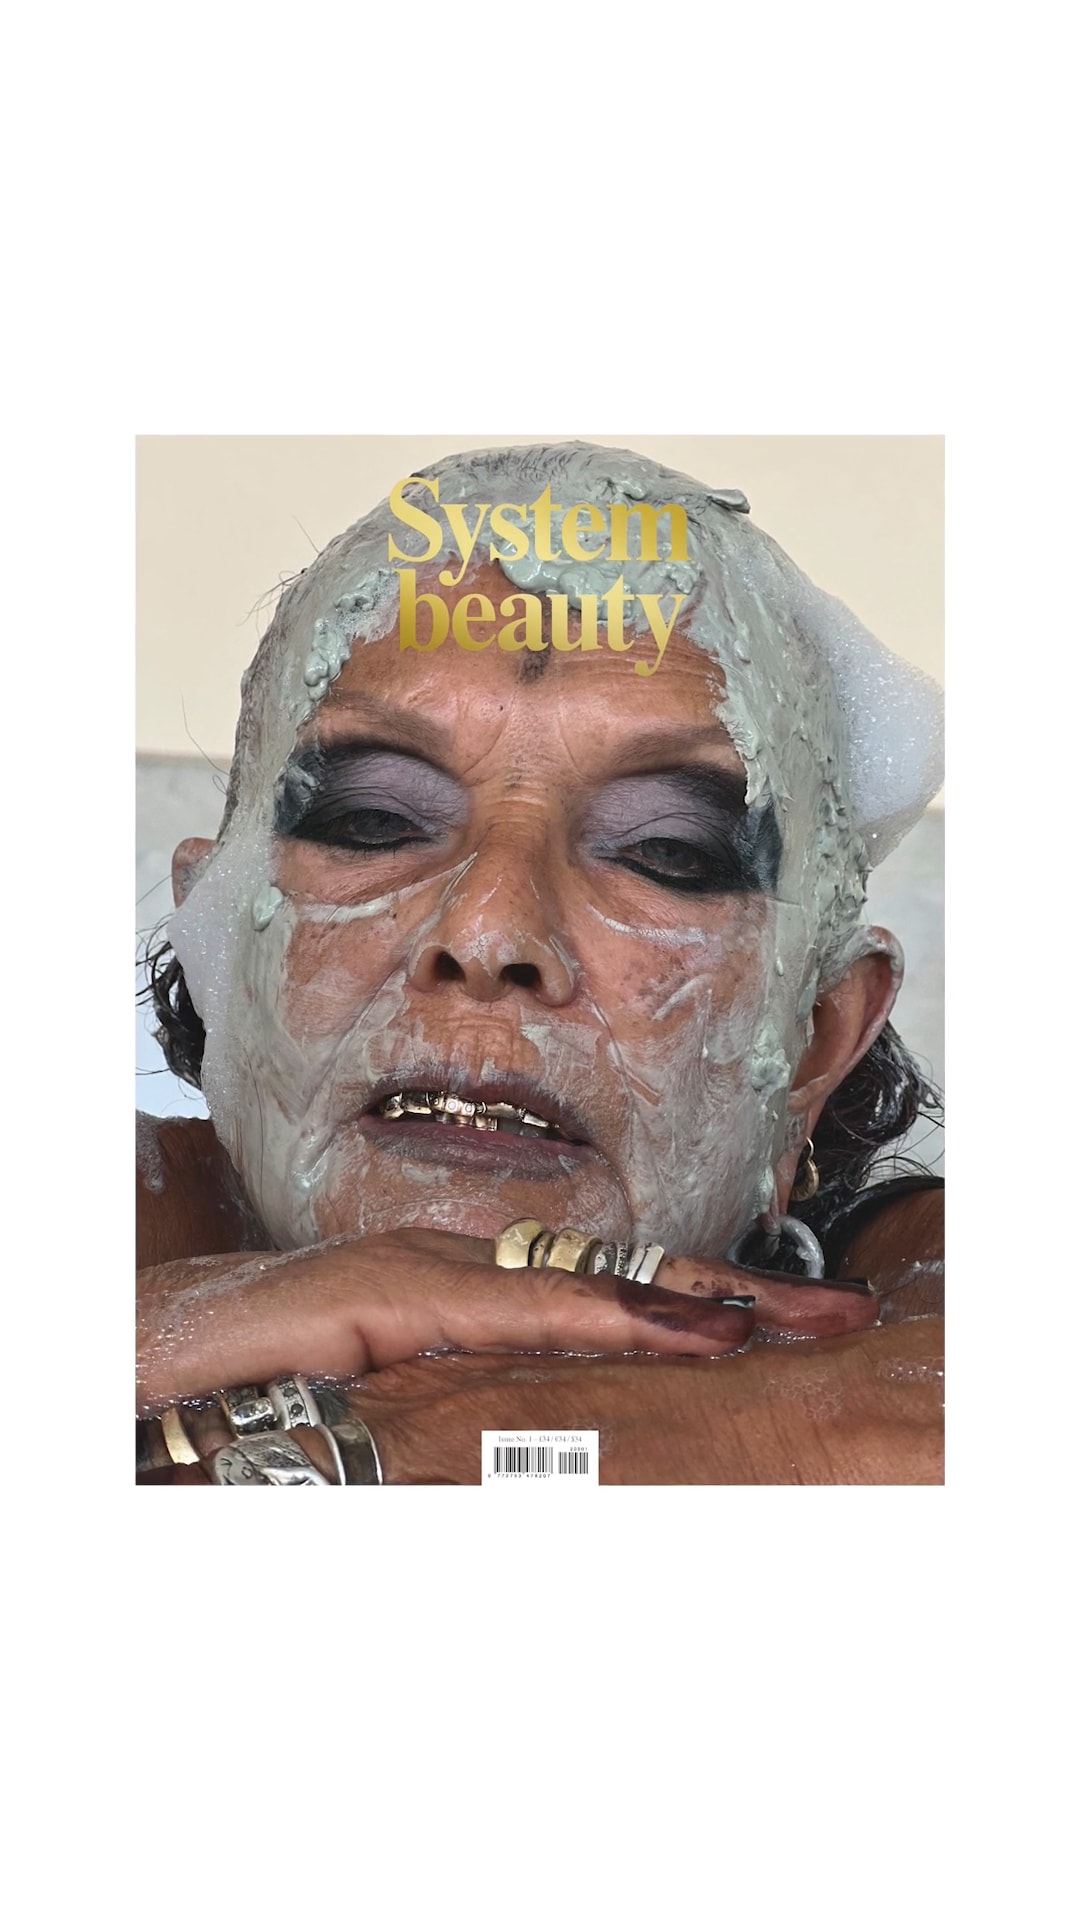 System beauty cover reveal - © System Magazine